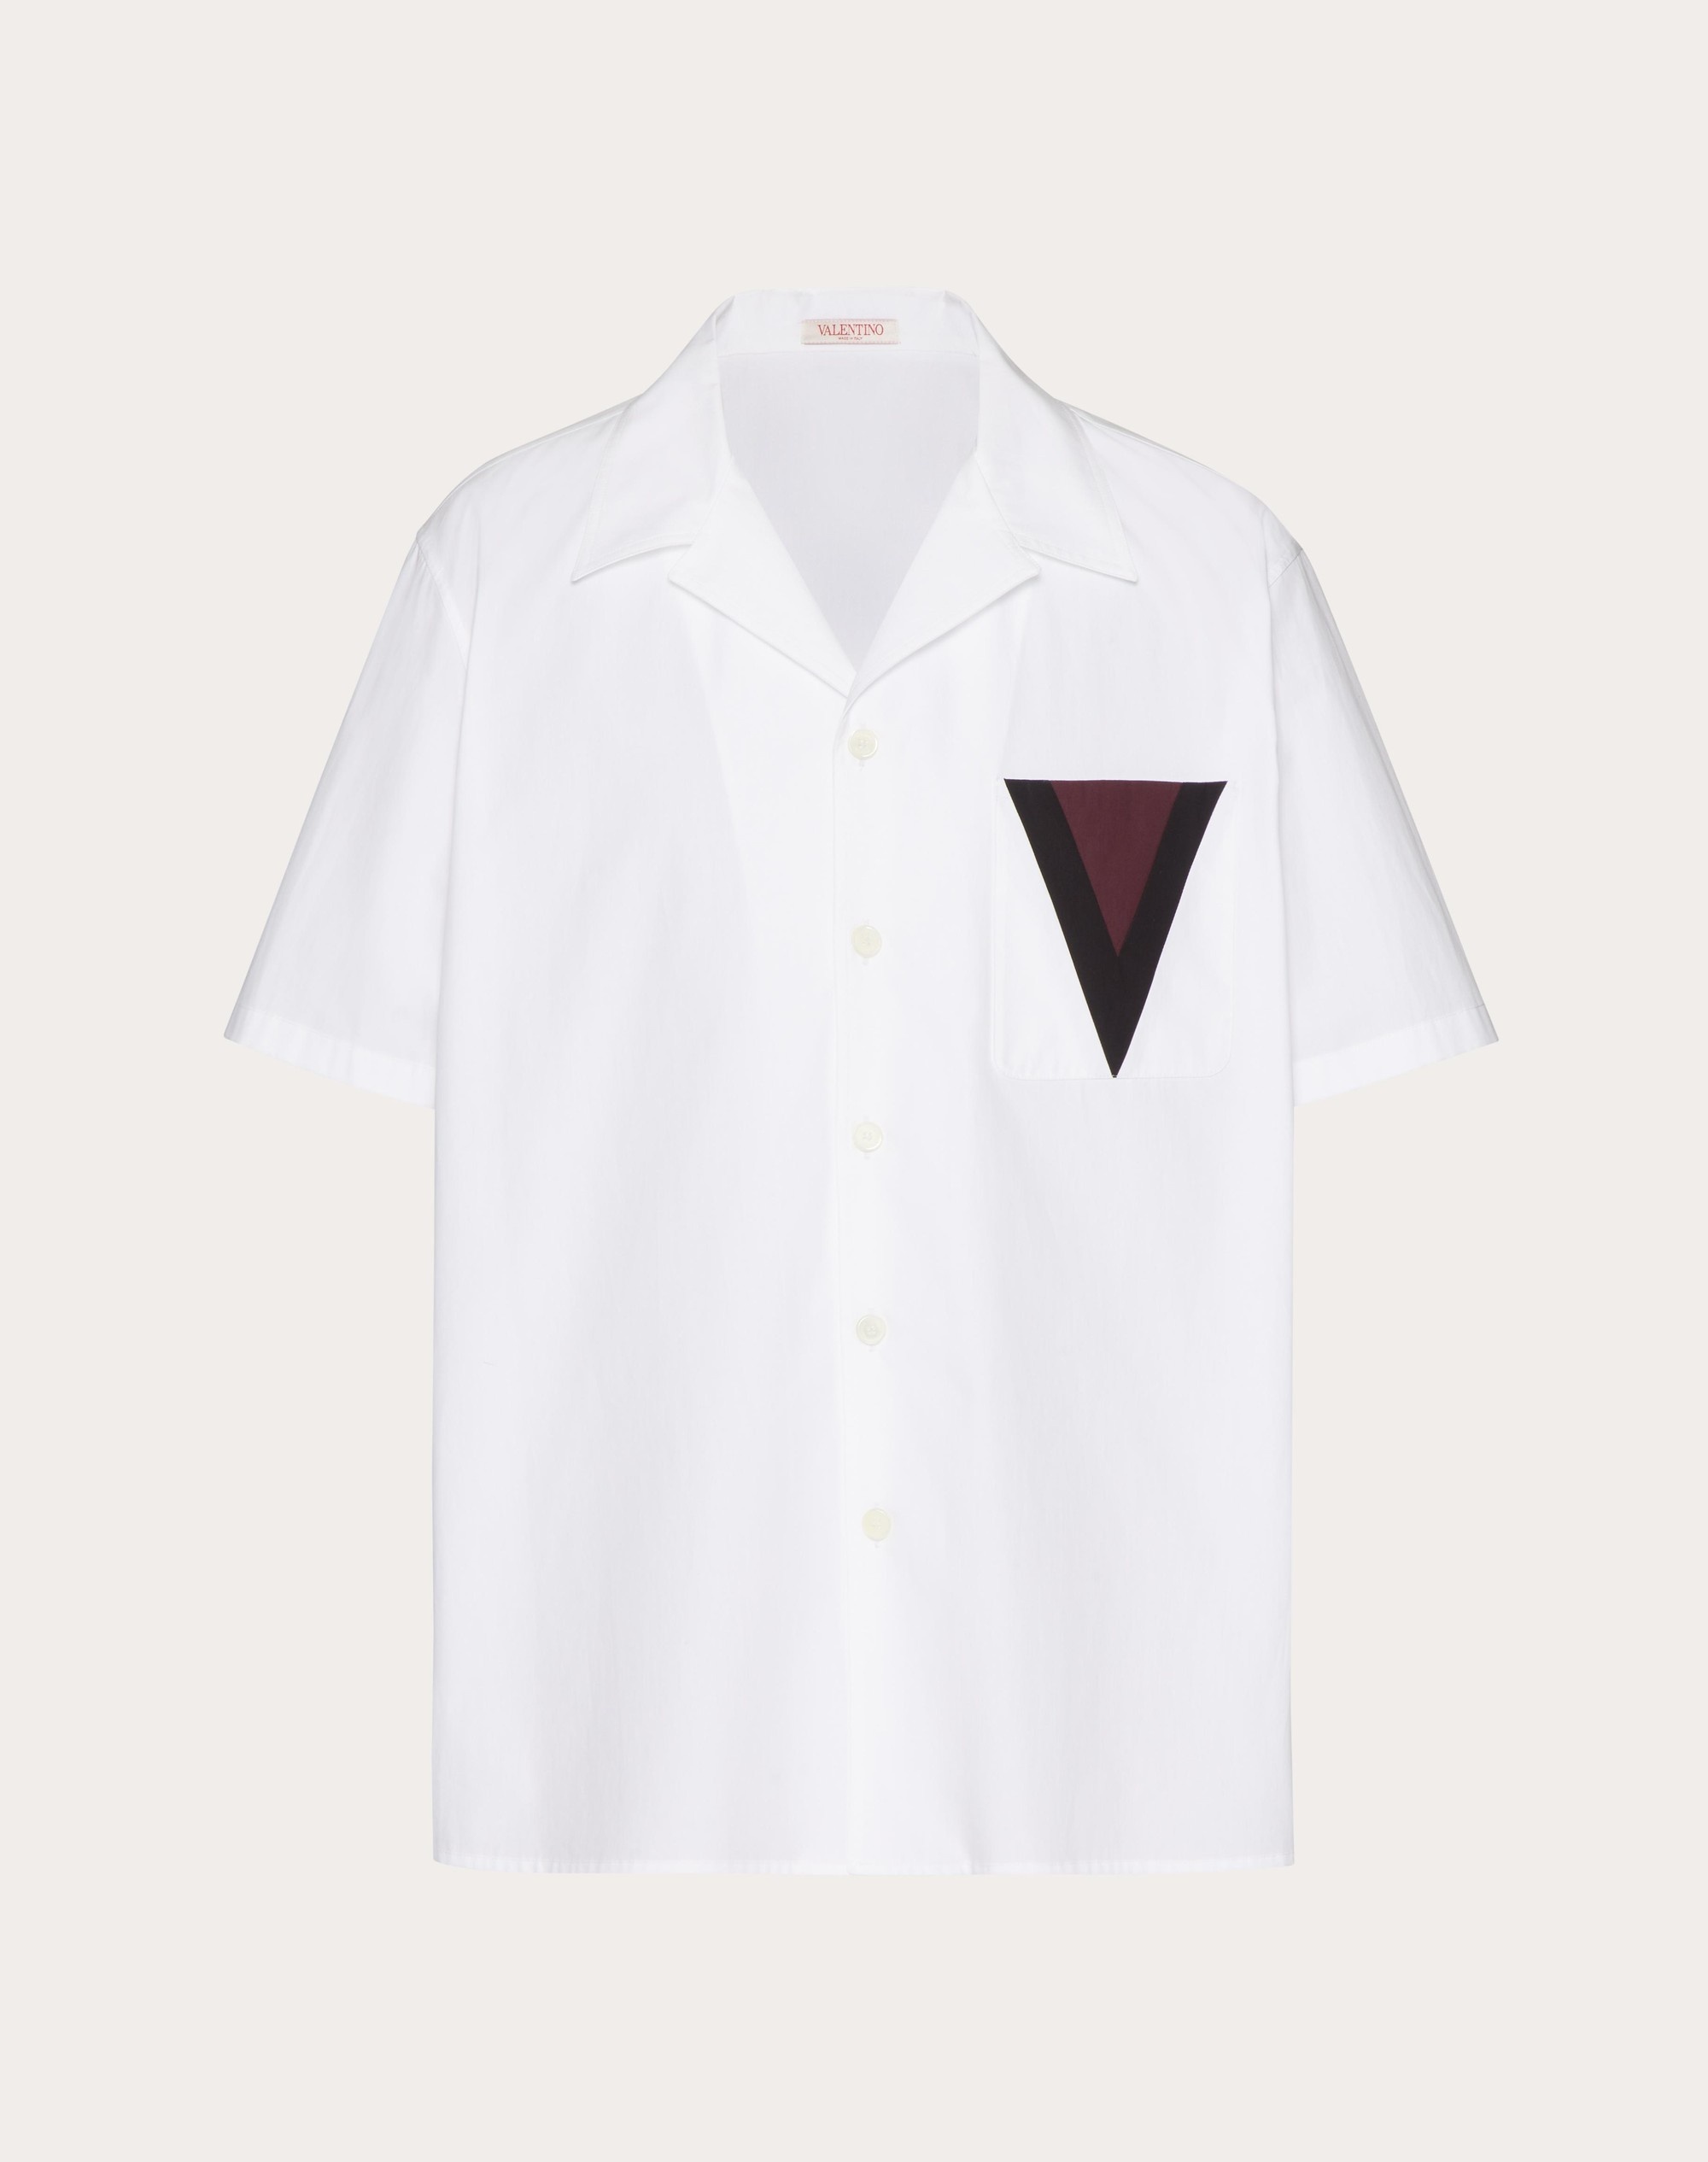 COTTON BOWLING SHIRT WITH INLAID V DETAIL - 1